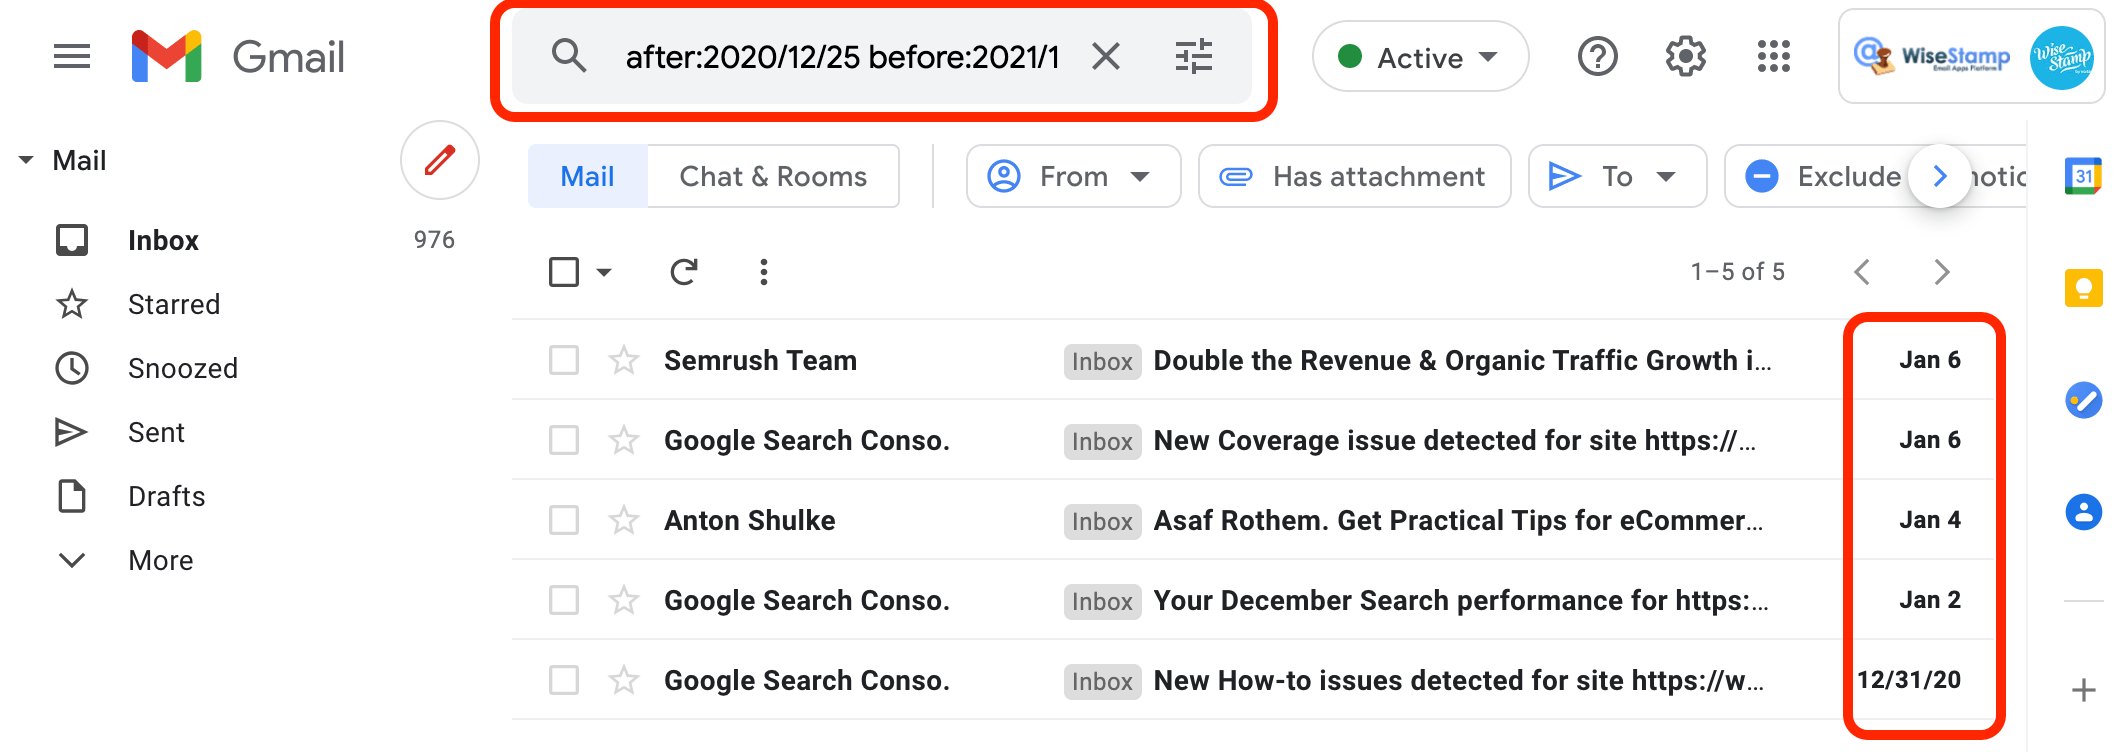 sort gmail inbox by date before and after